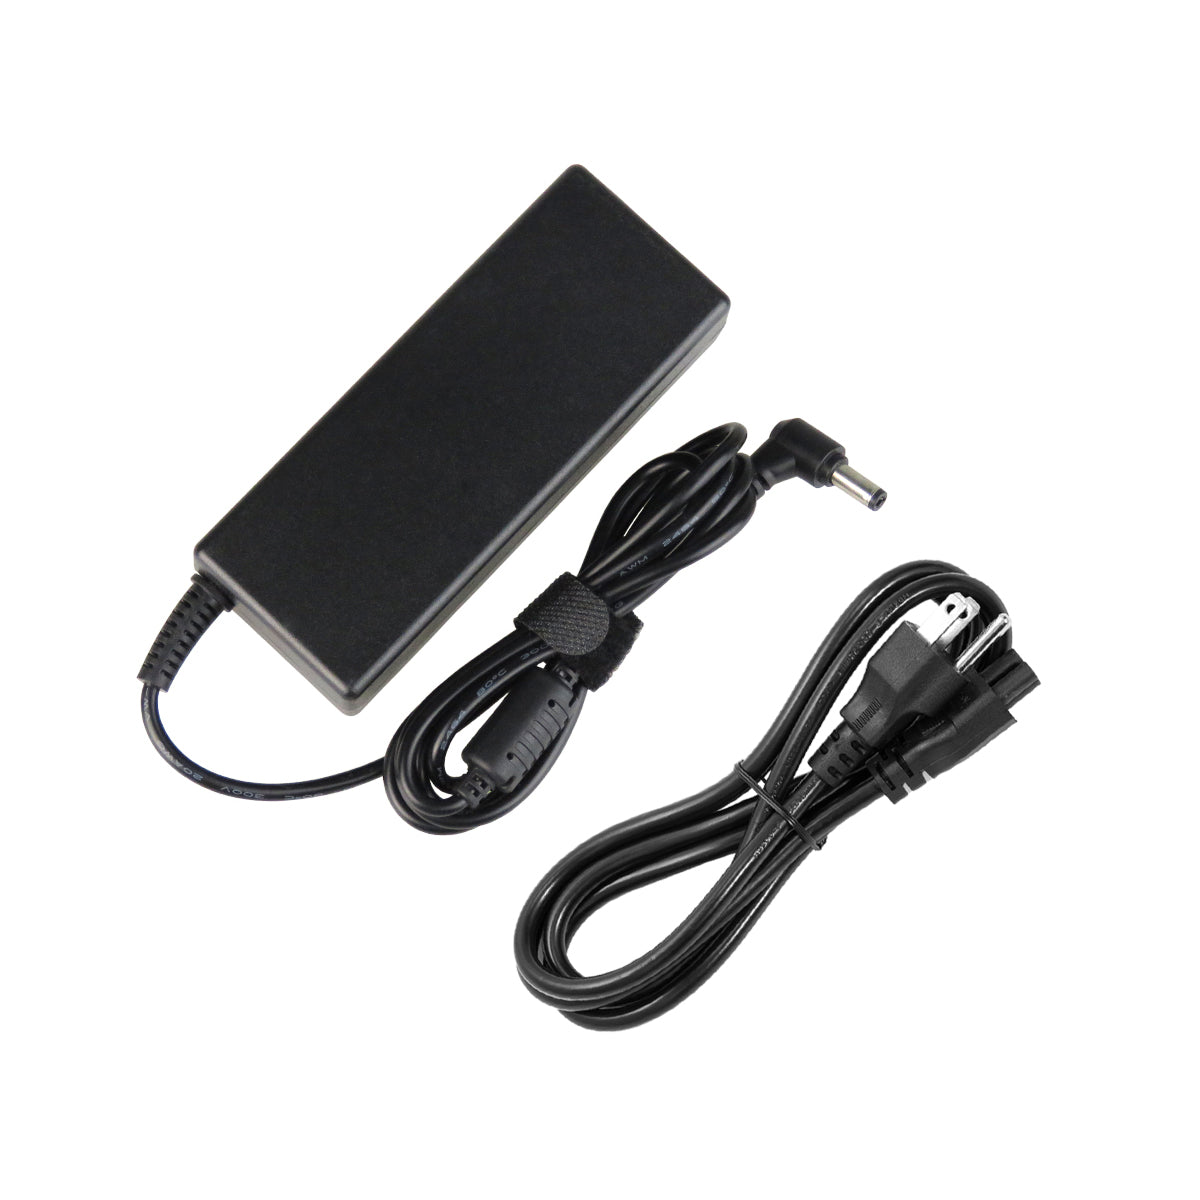 AC Adapter Charger for ASUS A45N Notebook.